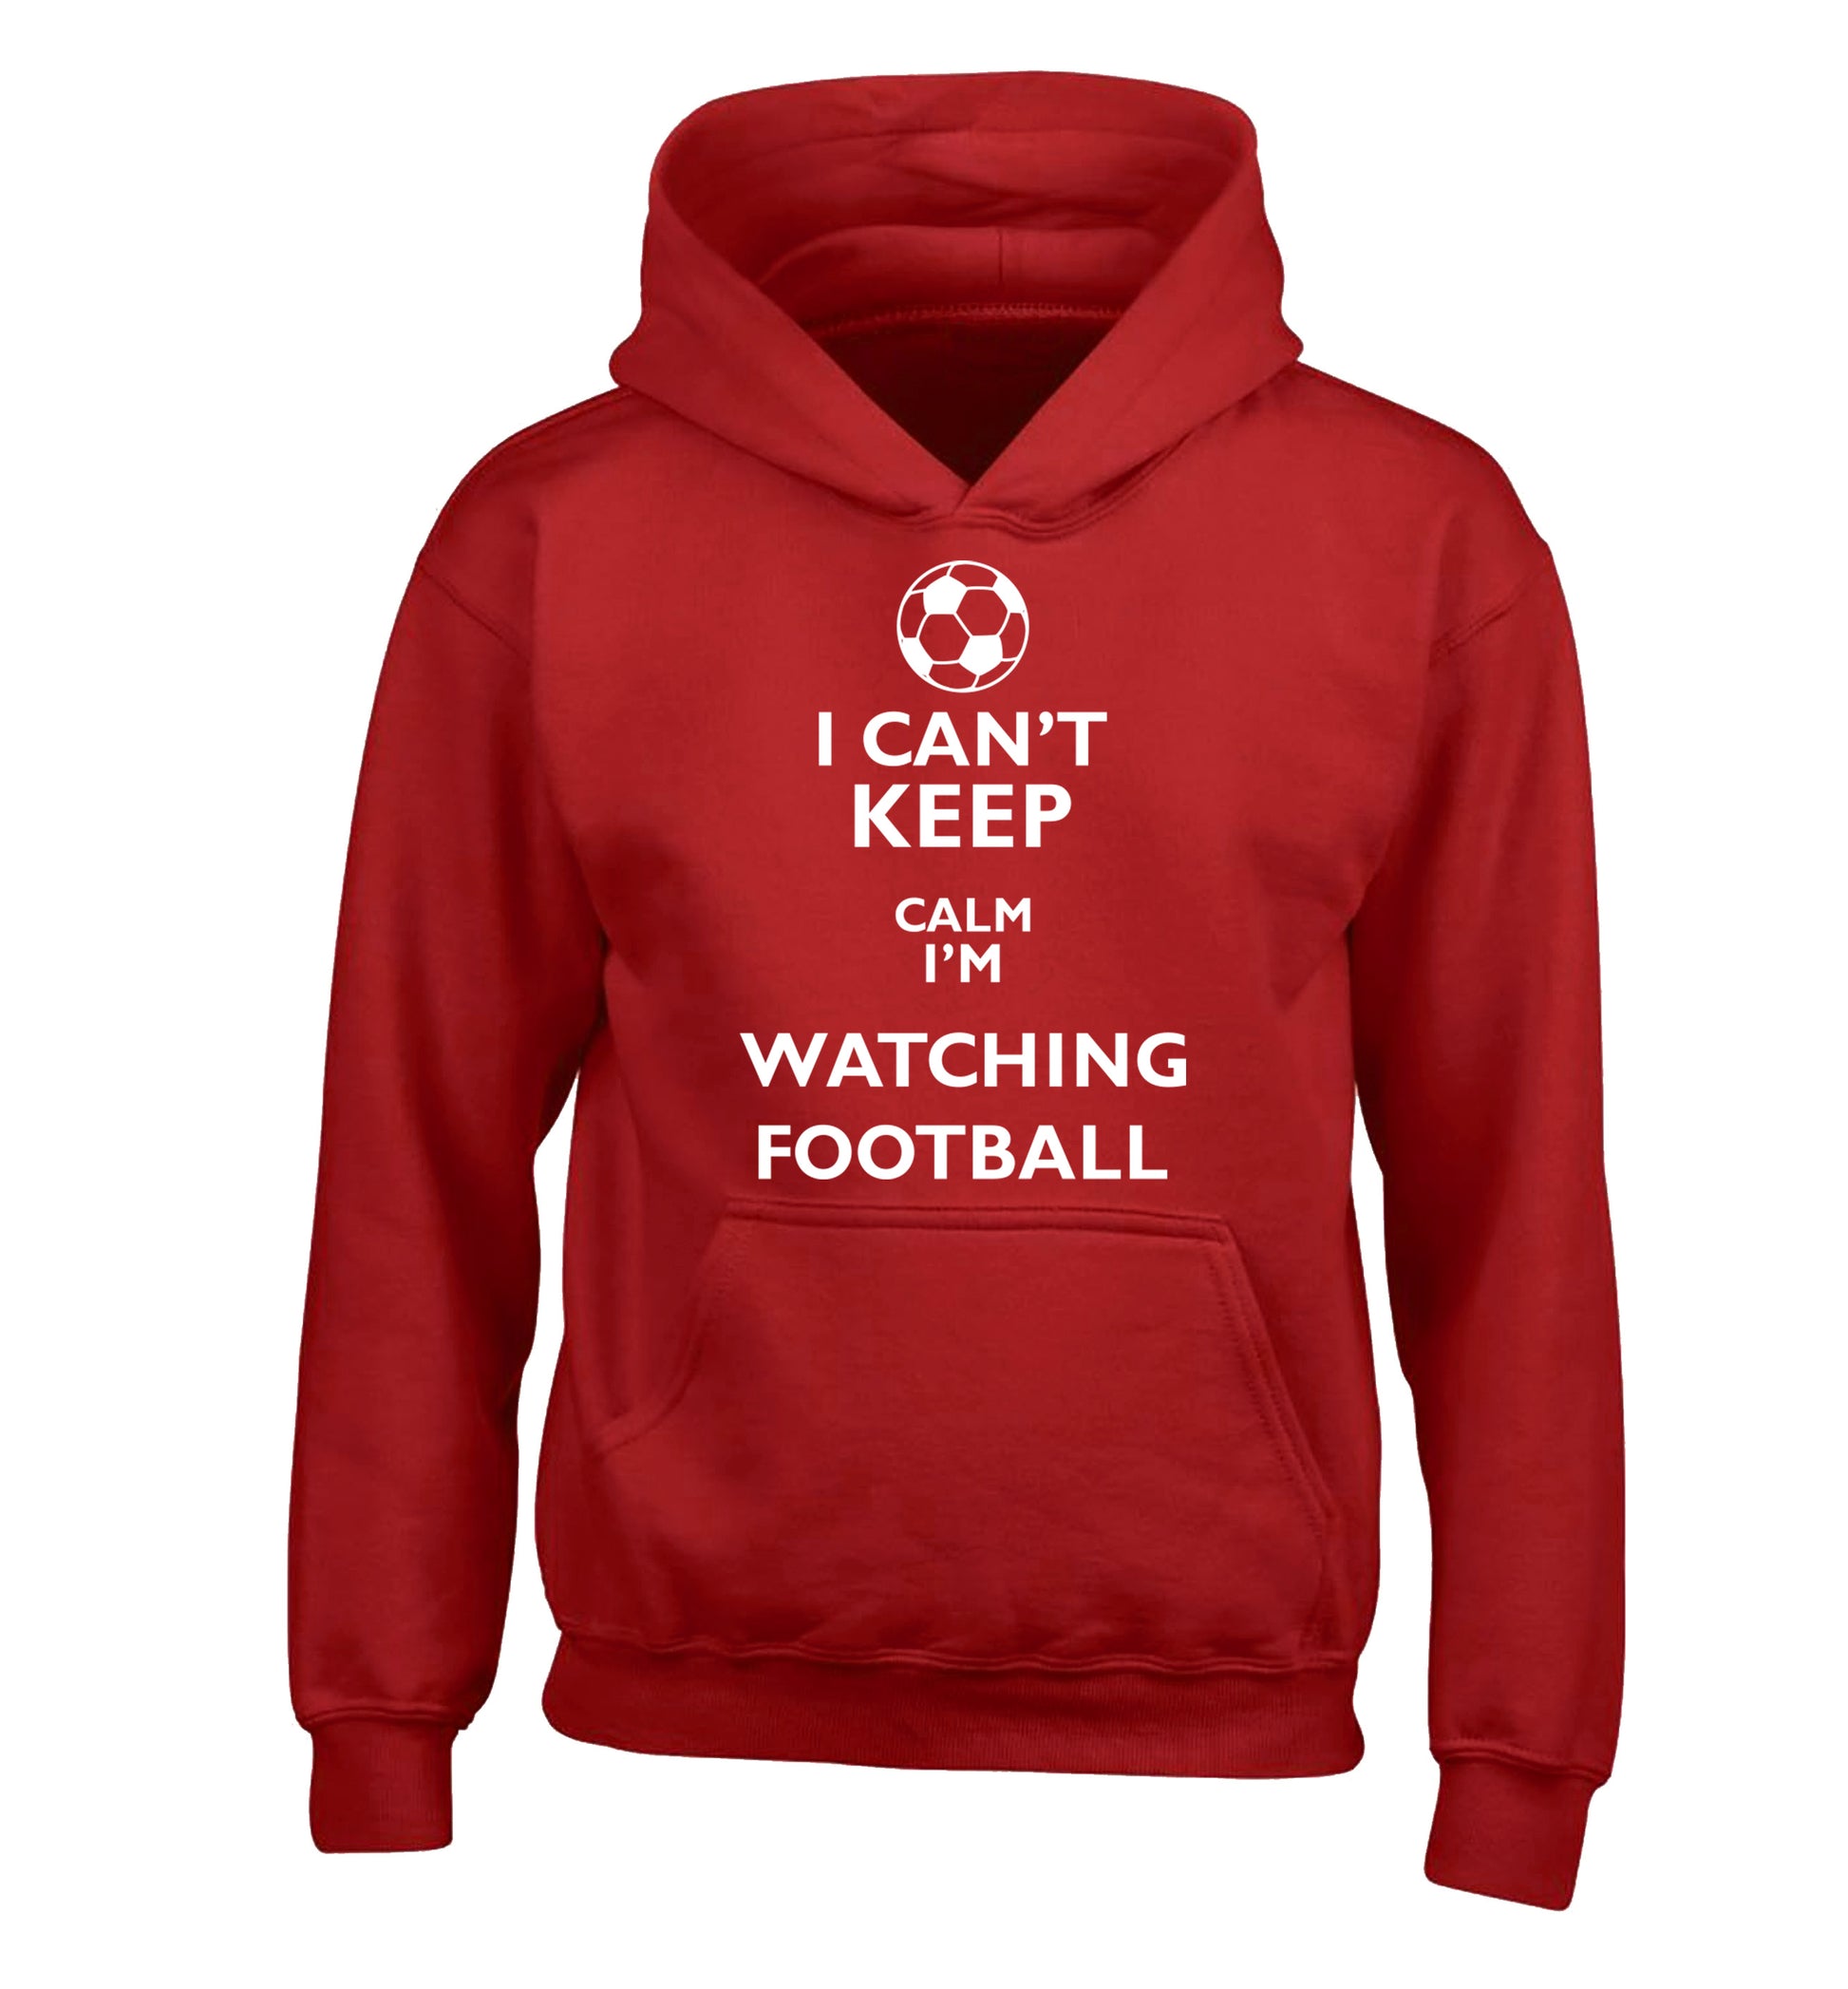 I can't keep calm I'm watching the football children's red hoodie 12-14 Years